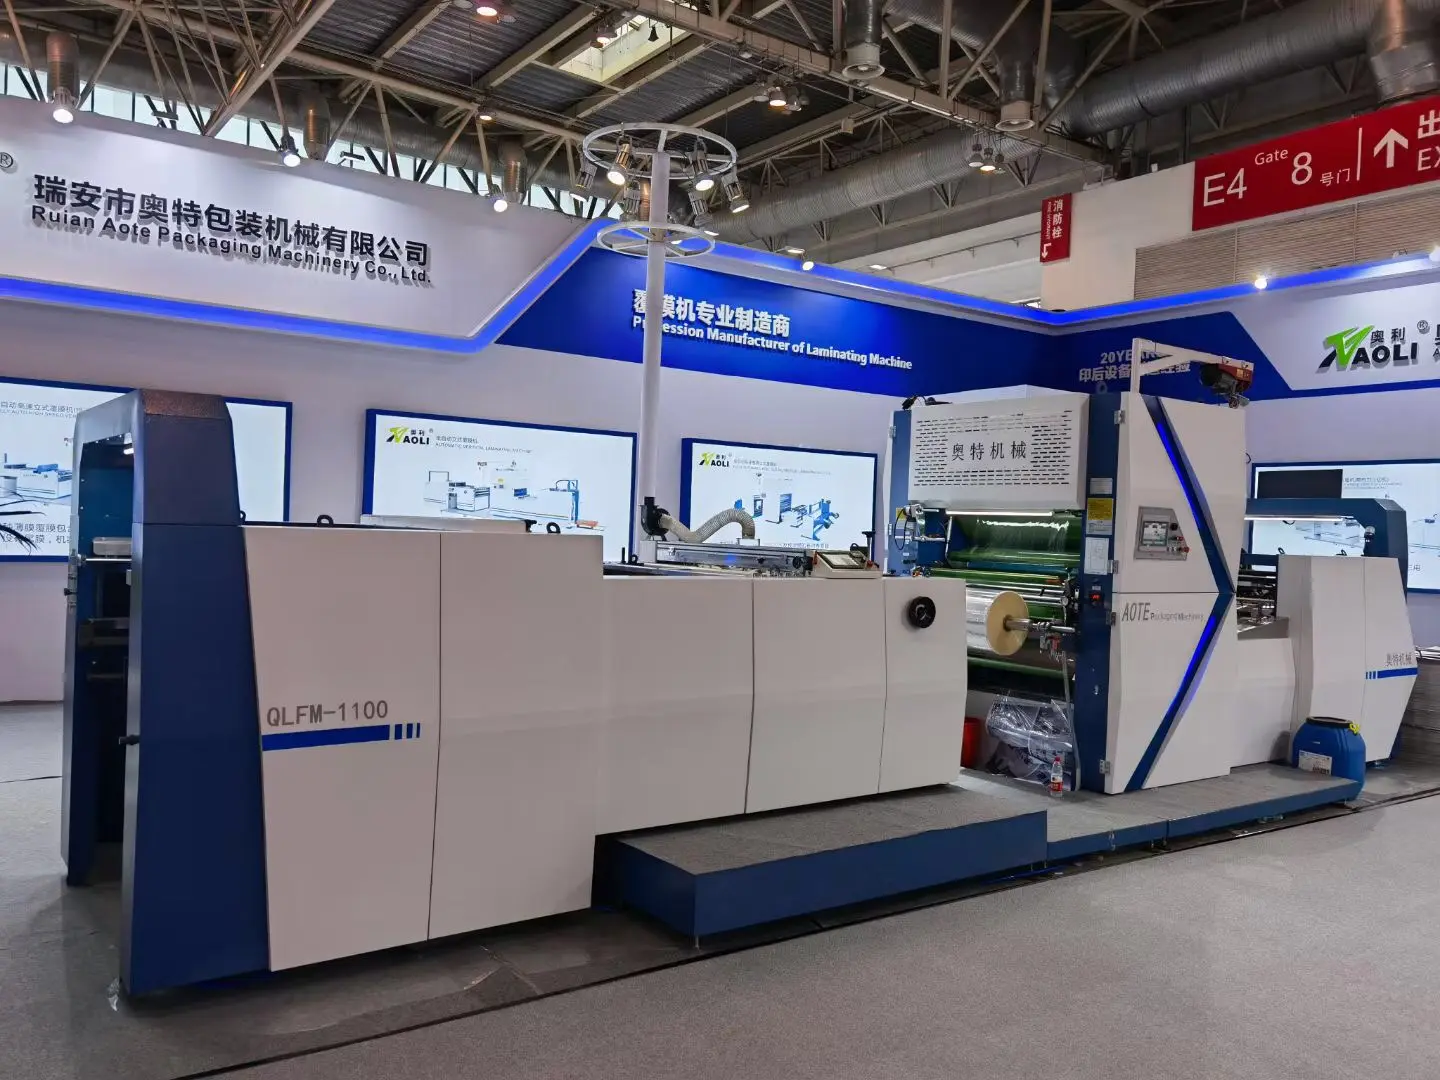 The 10th Beijing International Printing Technology Exhibition concluded in a success